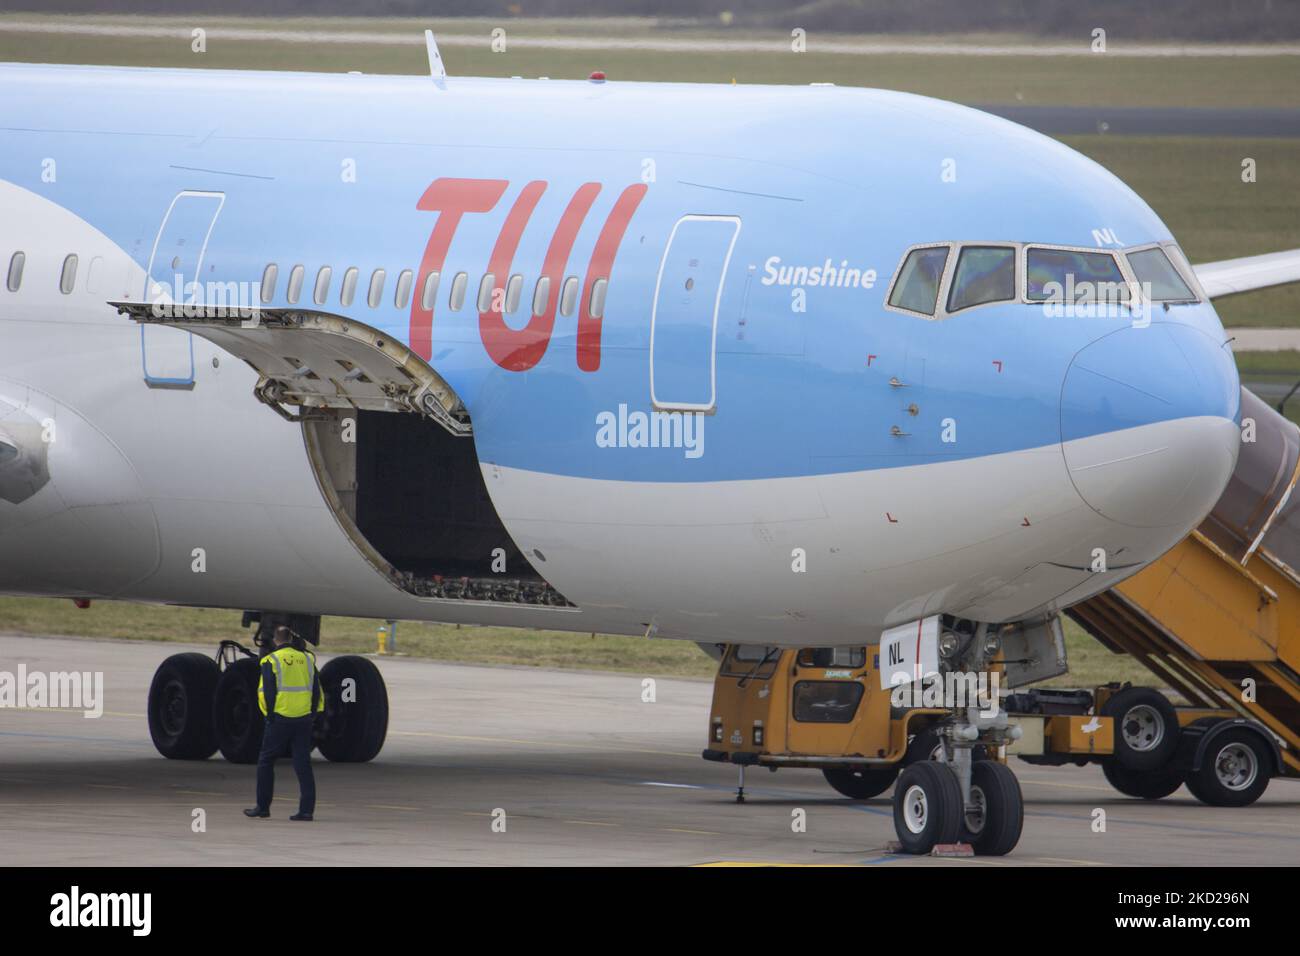 The Cargo door open under the TUI logo. TUI Airlines Belgium Boeing 767-300ER aircraft as seen on final approach flying, landing on the runway and taxiing at Eindhoven Airport EIN performing a rare Dutch domestic route. The wide-body Boeing B767 passenger airplane arrives from Amsterdam Schiphol Airport and has as a destination a charter flight to Bardufoss in Norway with flight number OR9531. The jet plane has the registration OO-JNL and the name Sunshine. TUI fly former Jetairfly, ArkeFly, is a Belgian scheduled and charter airline, subsidiary of TUI Group, the German multinational travel an Stock Photo